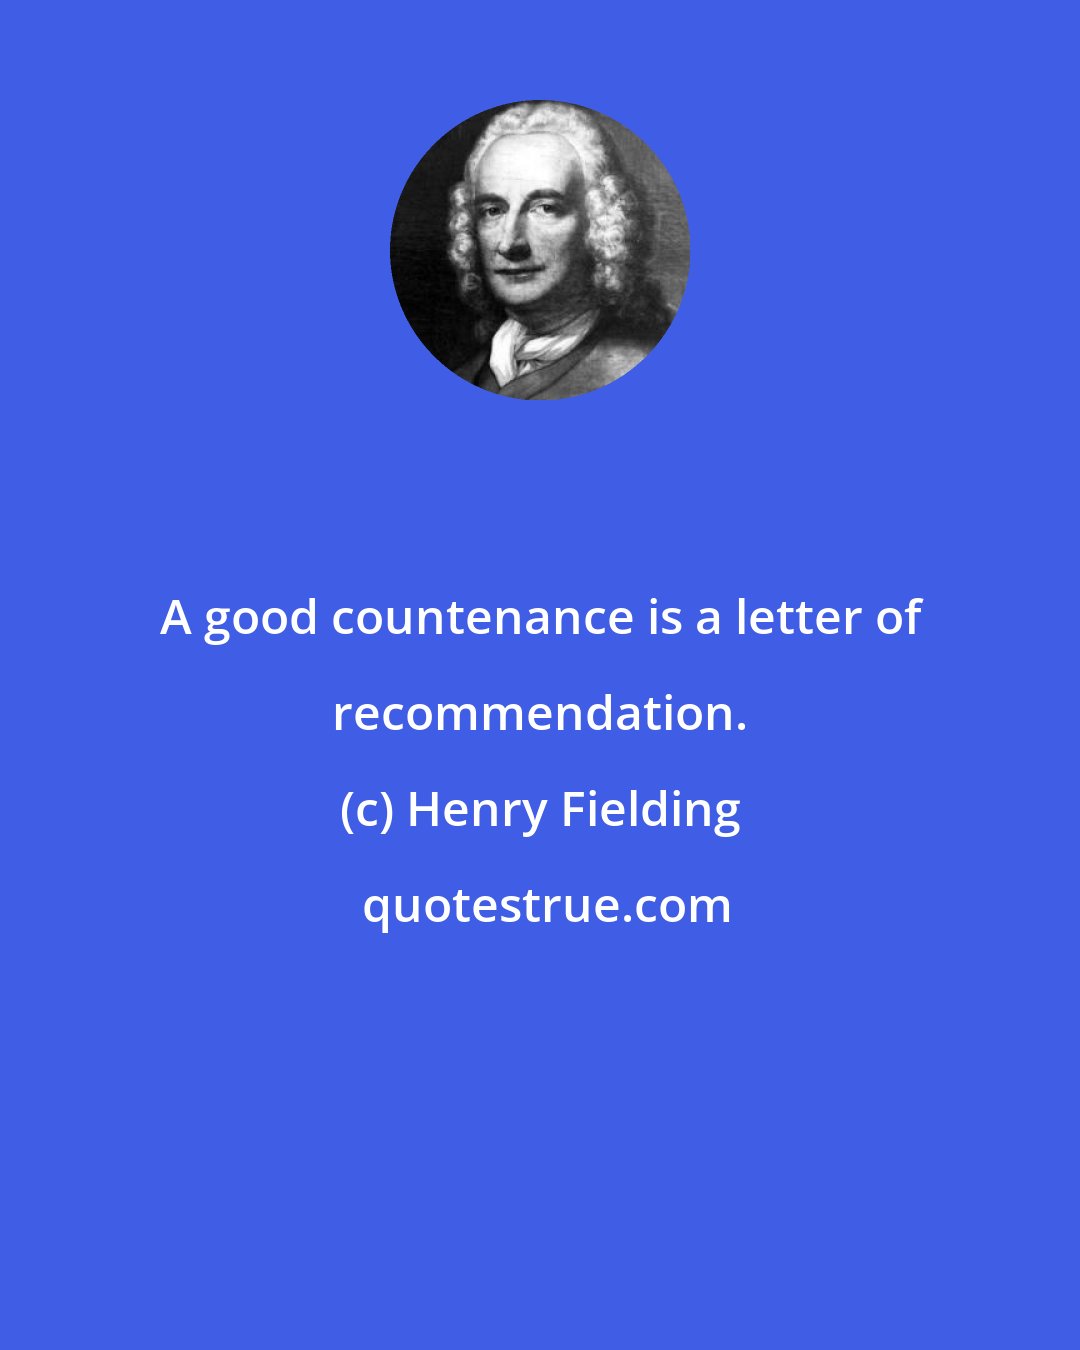 Henry Fielding: A good countenance is a letter of recommendation.